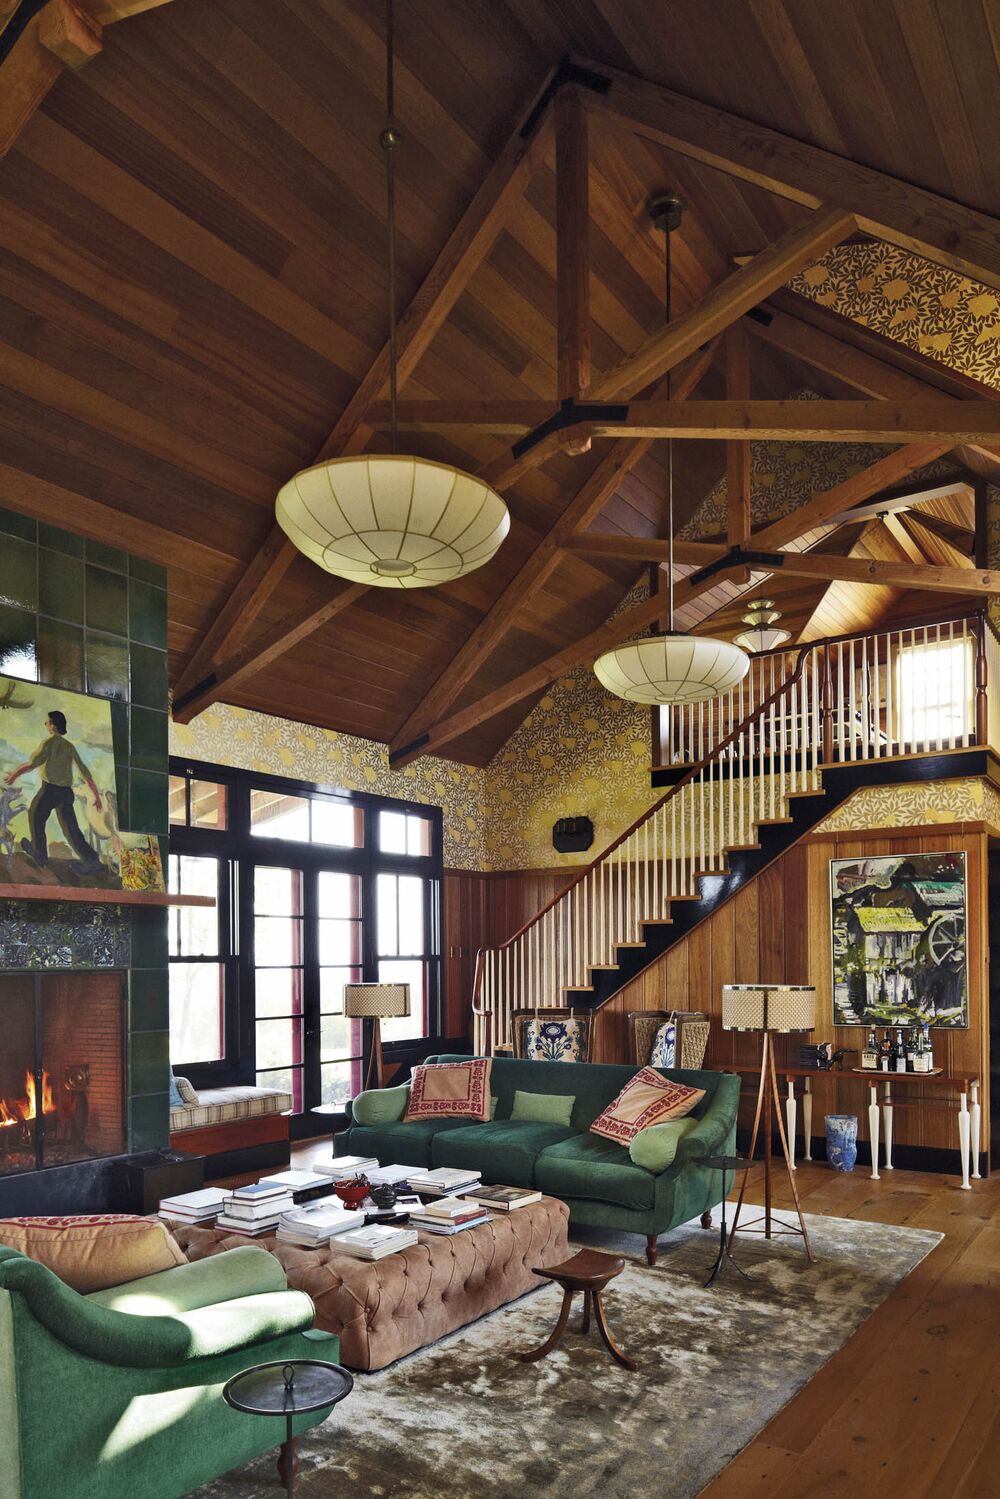 The living room in Bette Midler and Martin von Haselberg's country house